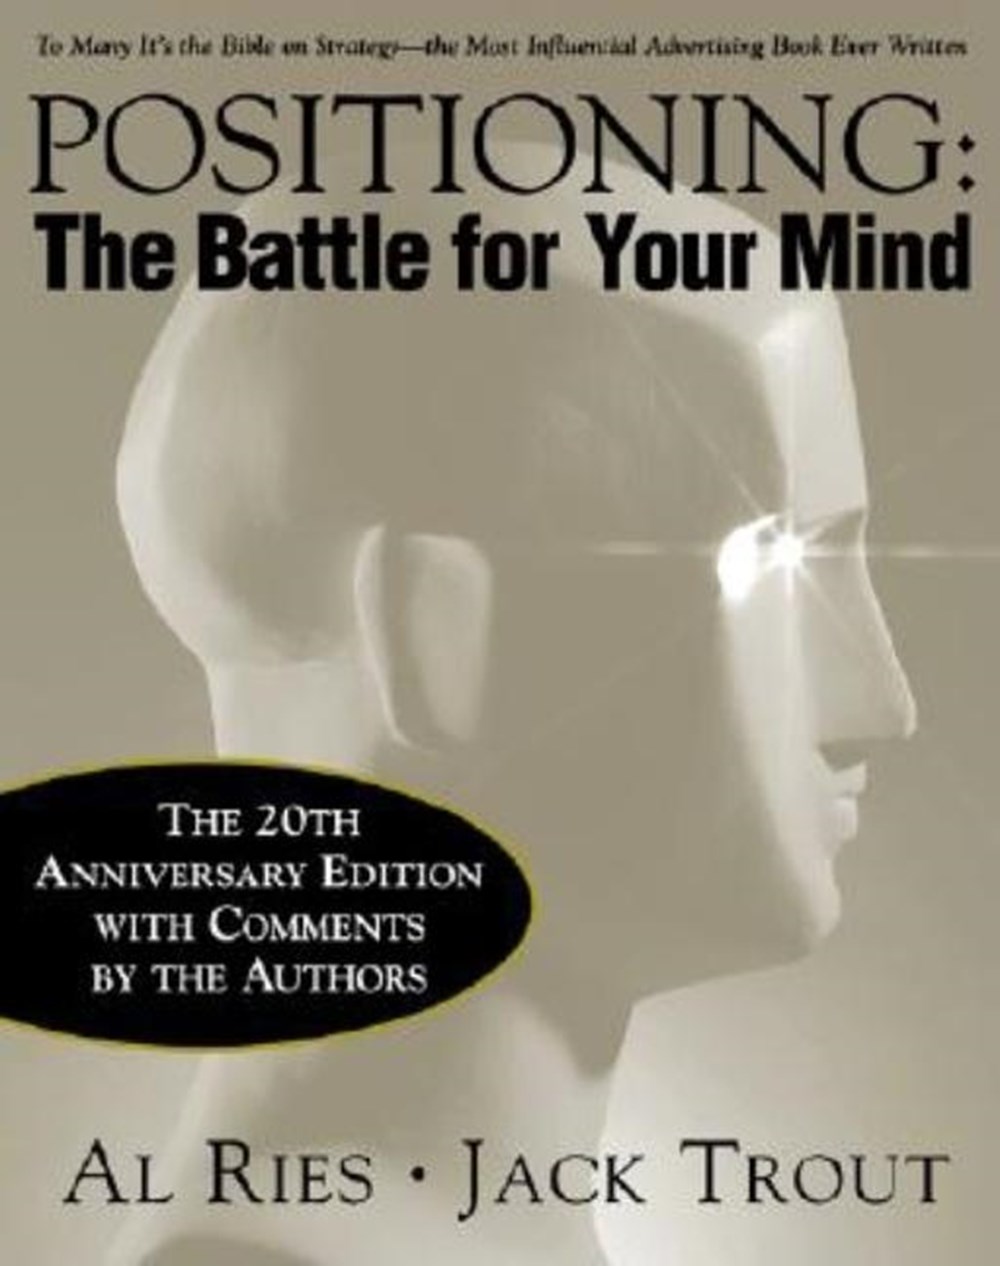 Positioning The Battle for Your Mind, 20th Anniversary Edition (Anniversary)